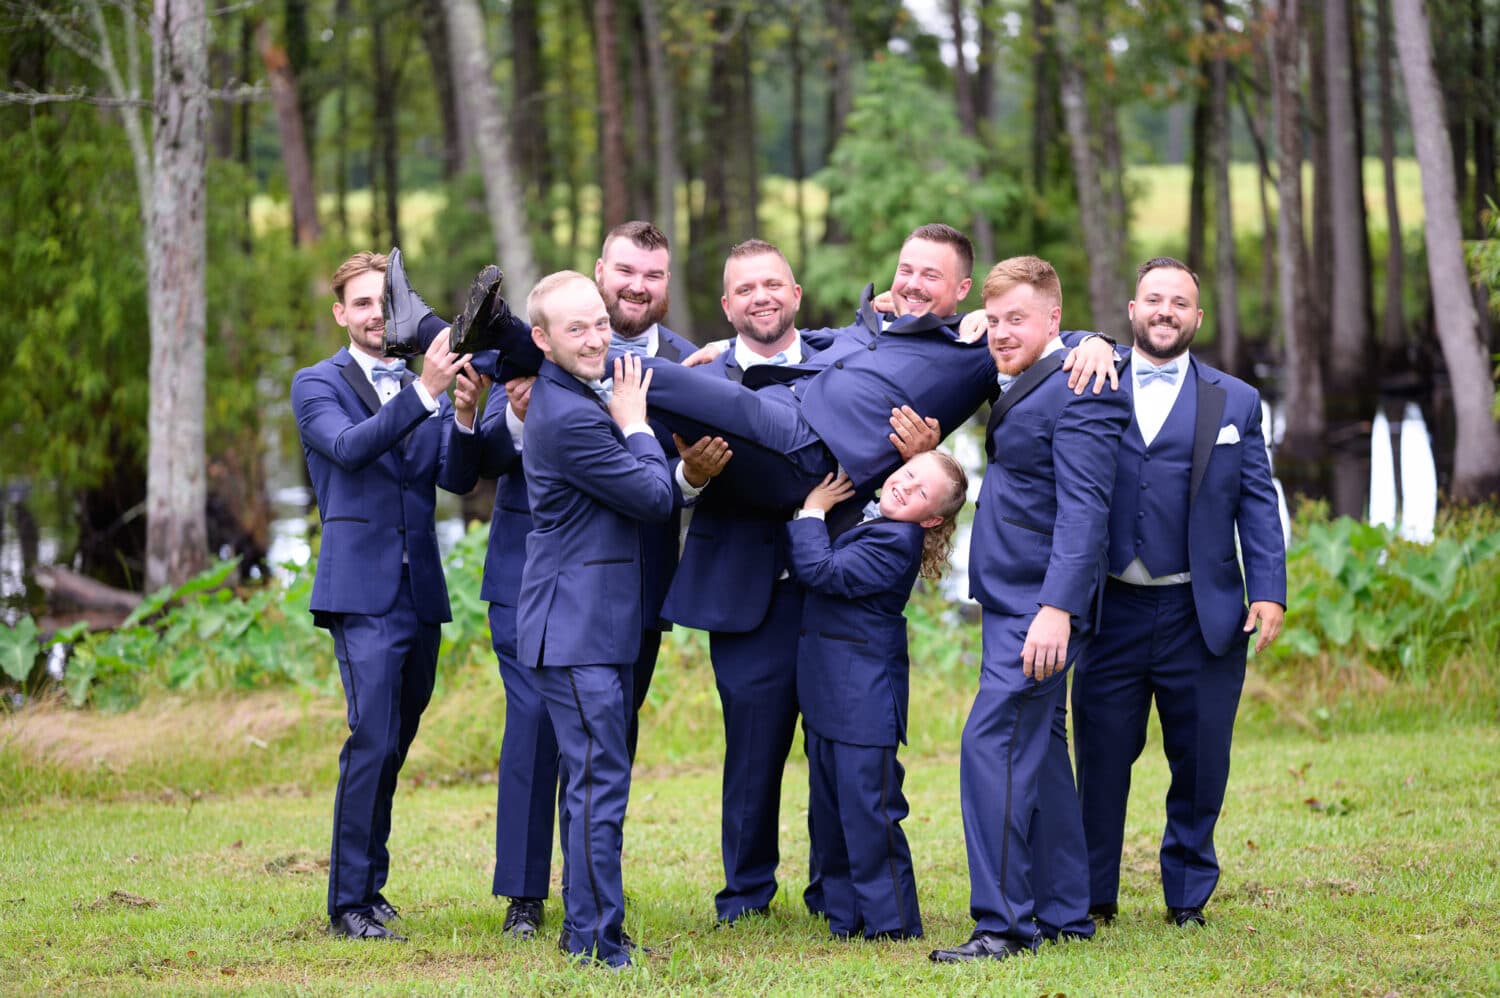 Guys lifting up the groom - Wildhorse at Parker Farms